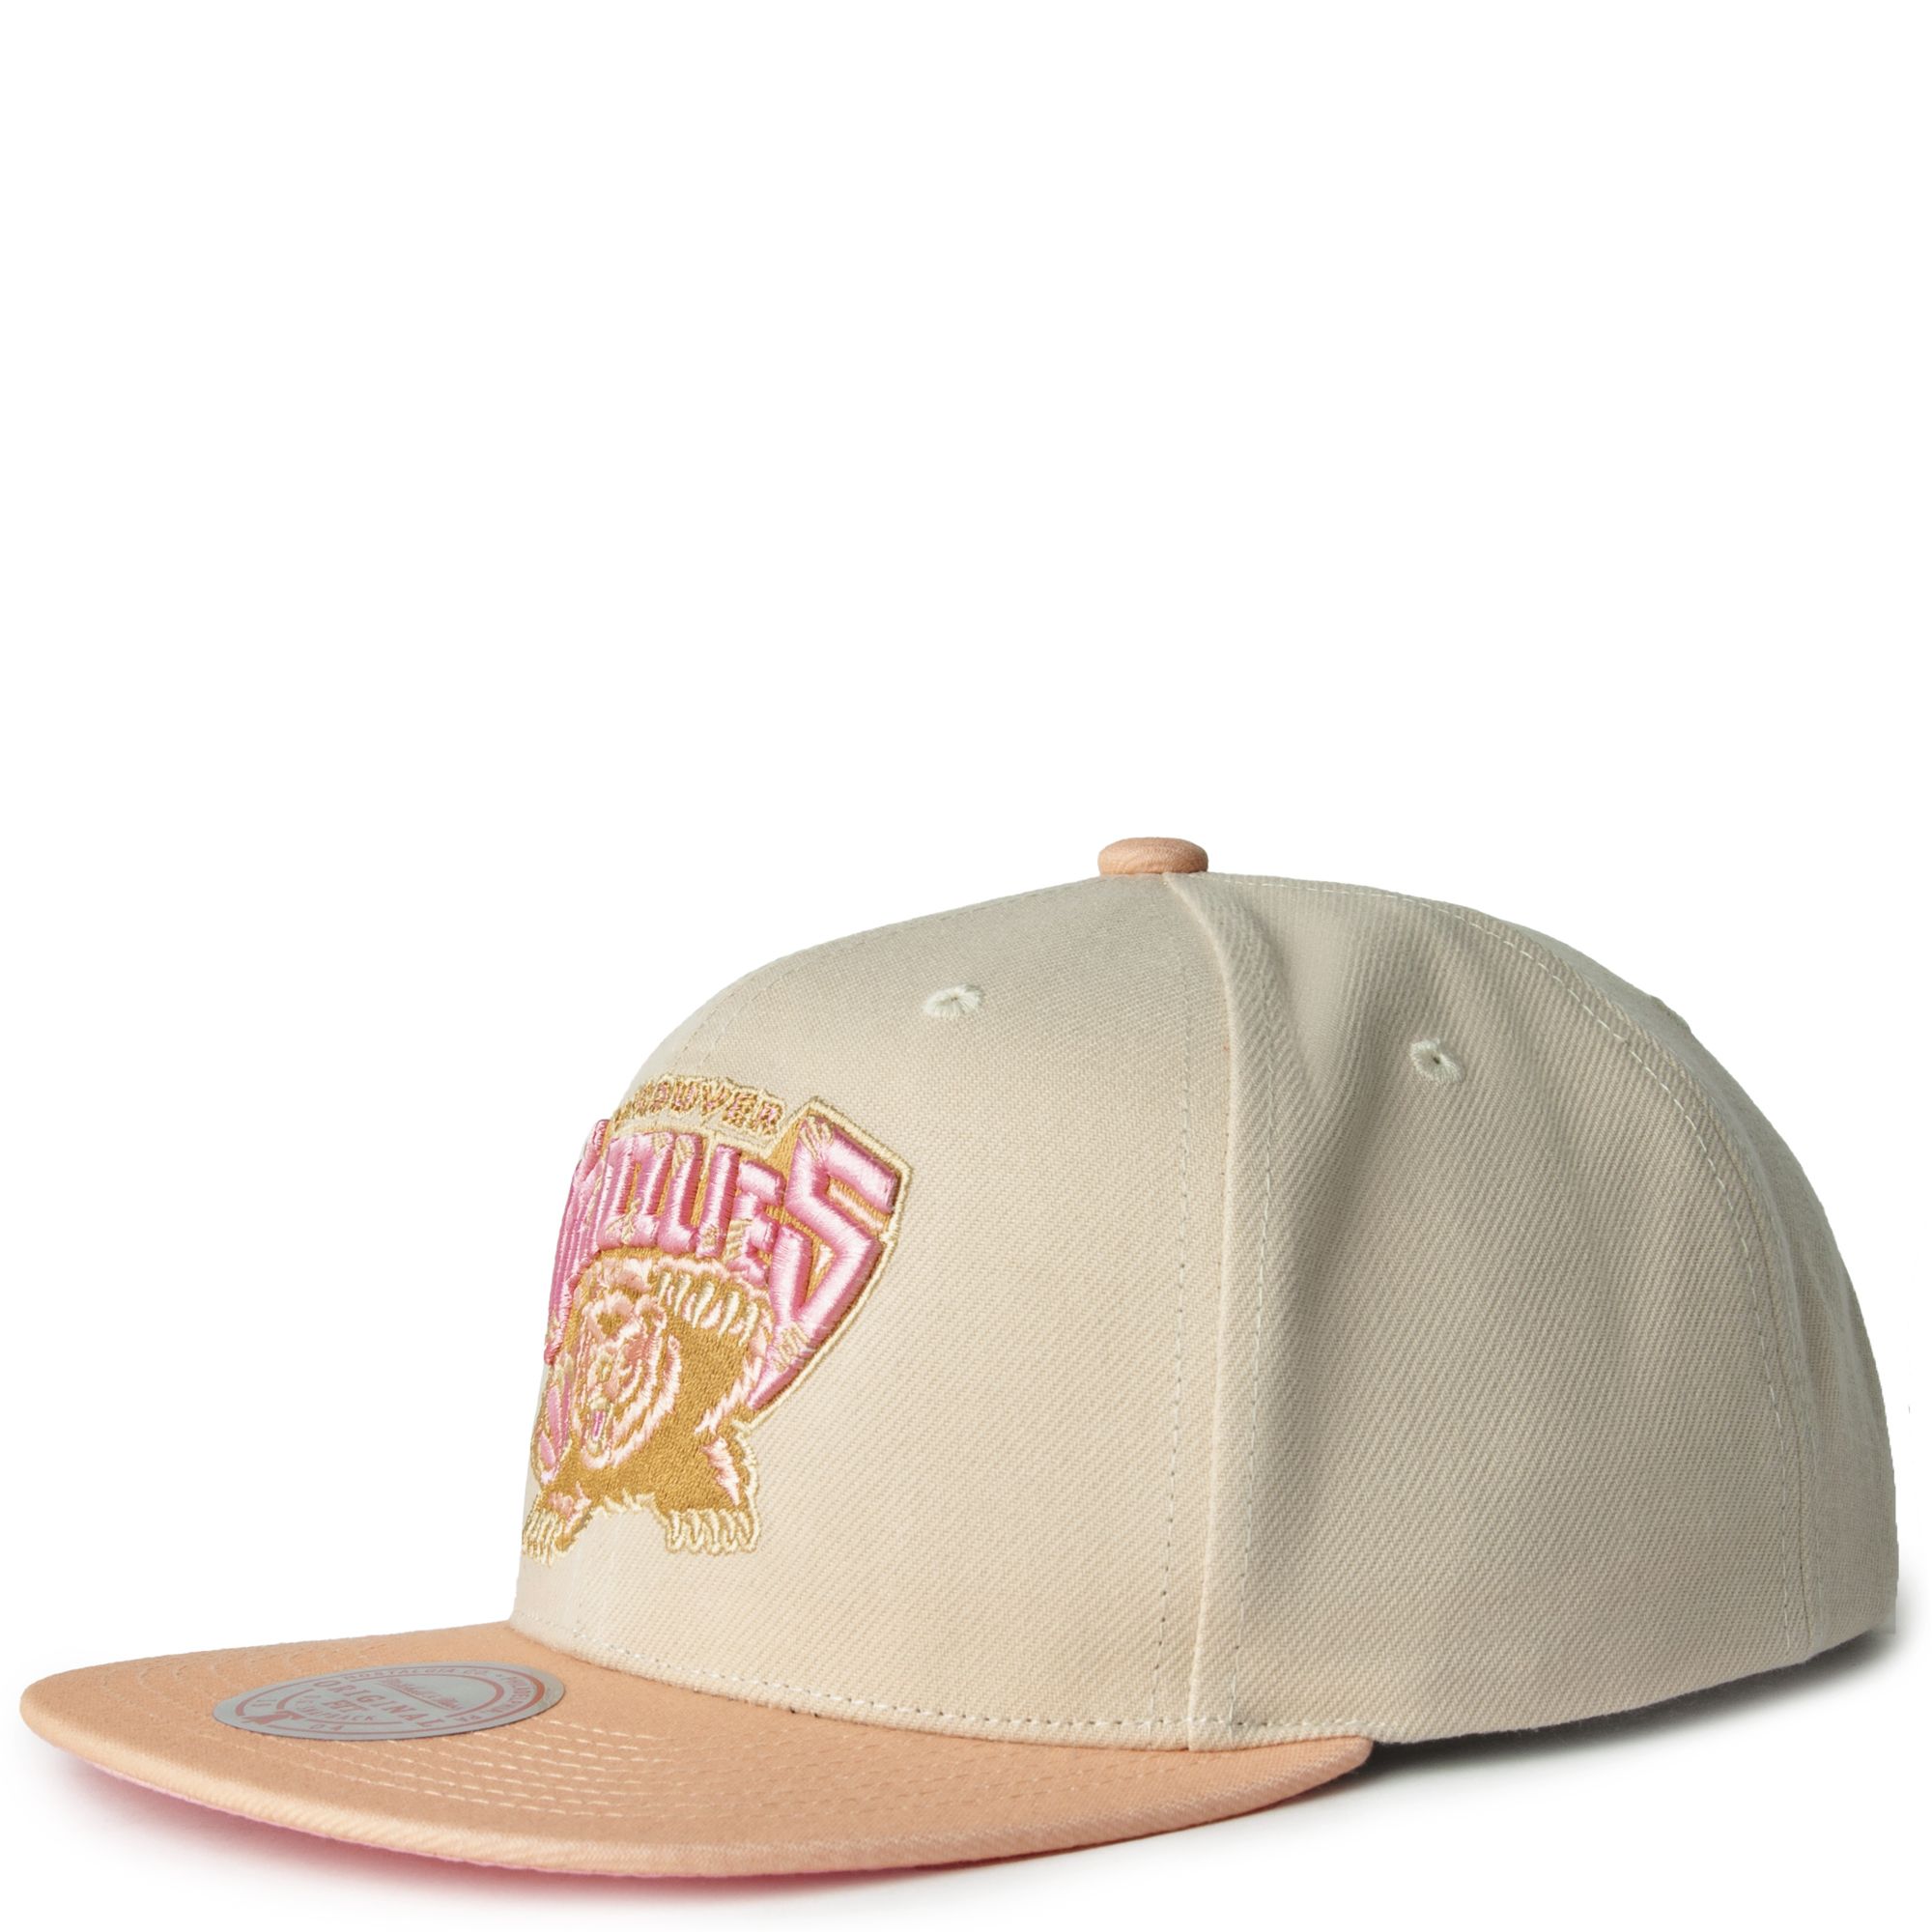 Mitchell and Ness Phoenix Suns Pastel Fitted Hat Off-White